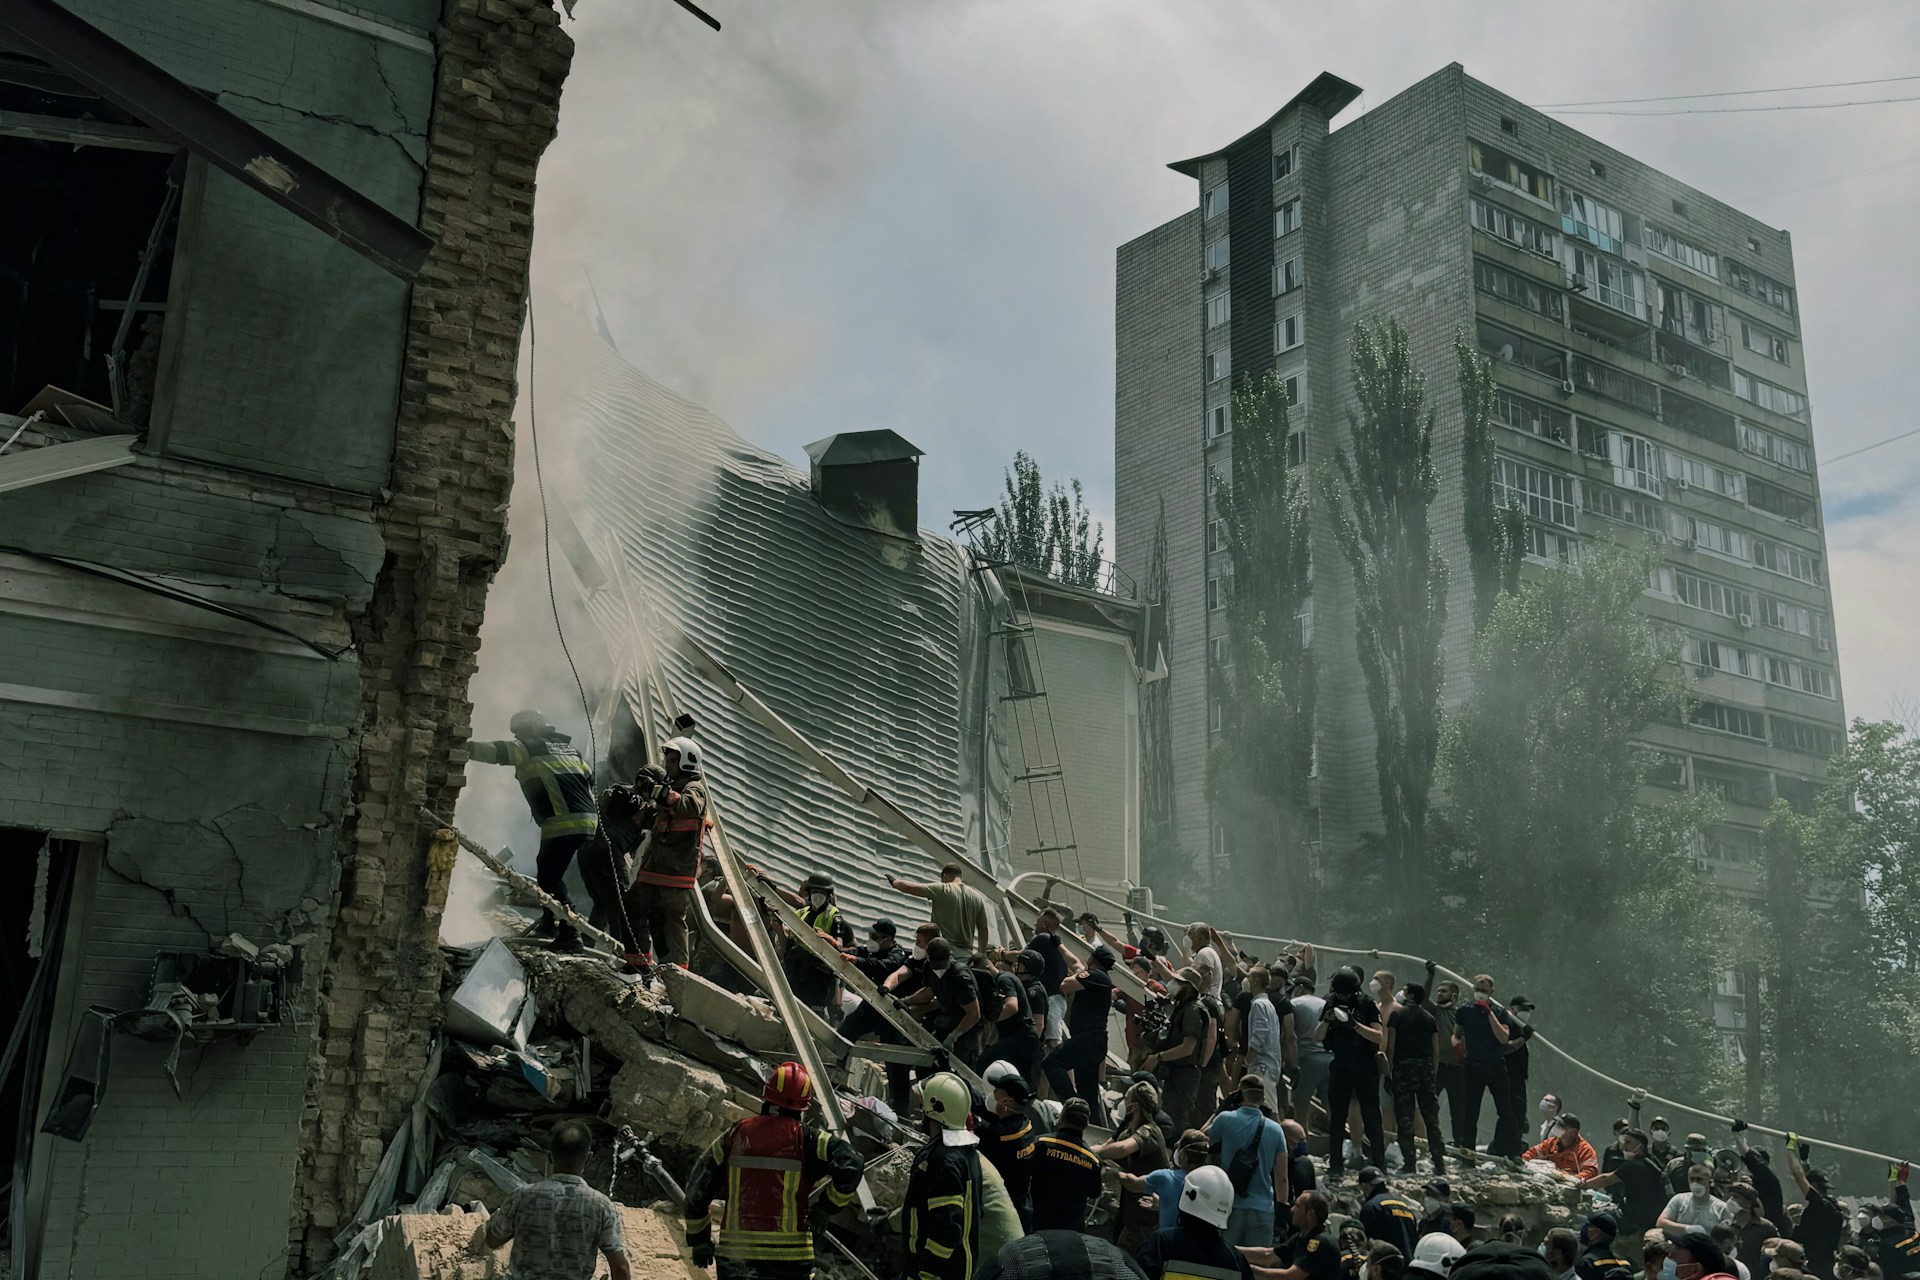 Rescue operations at a collapsed building with emergency responders and civilians among the rubble.